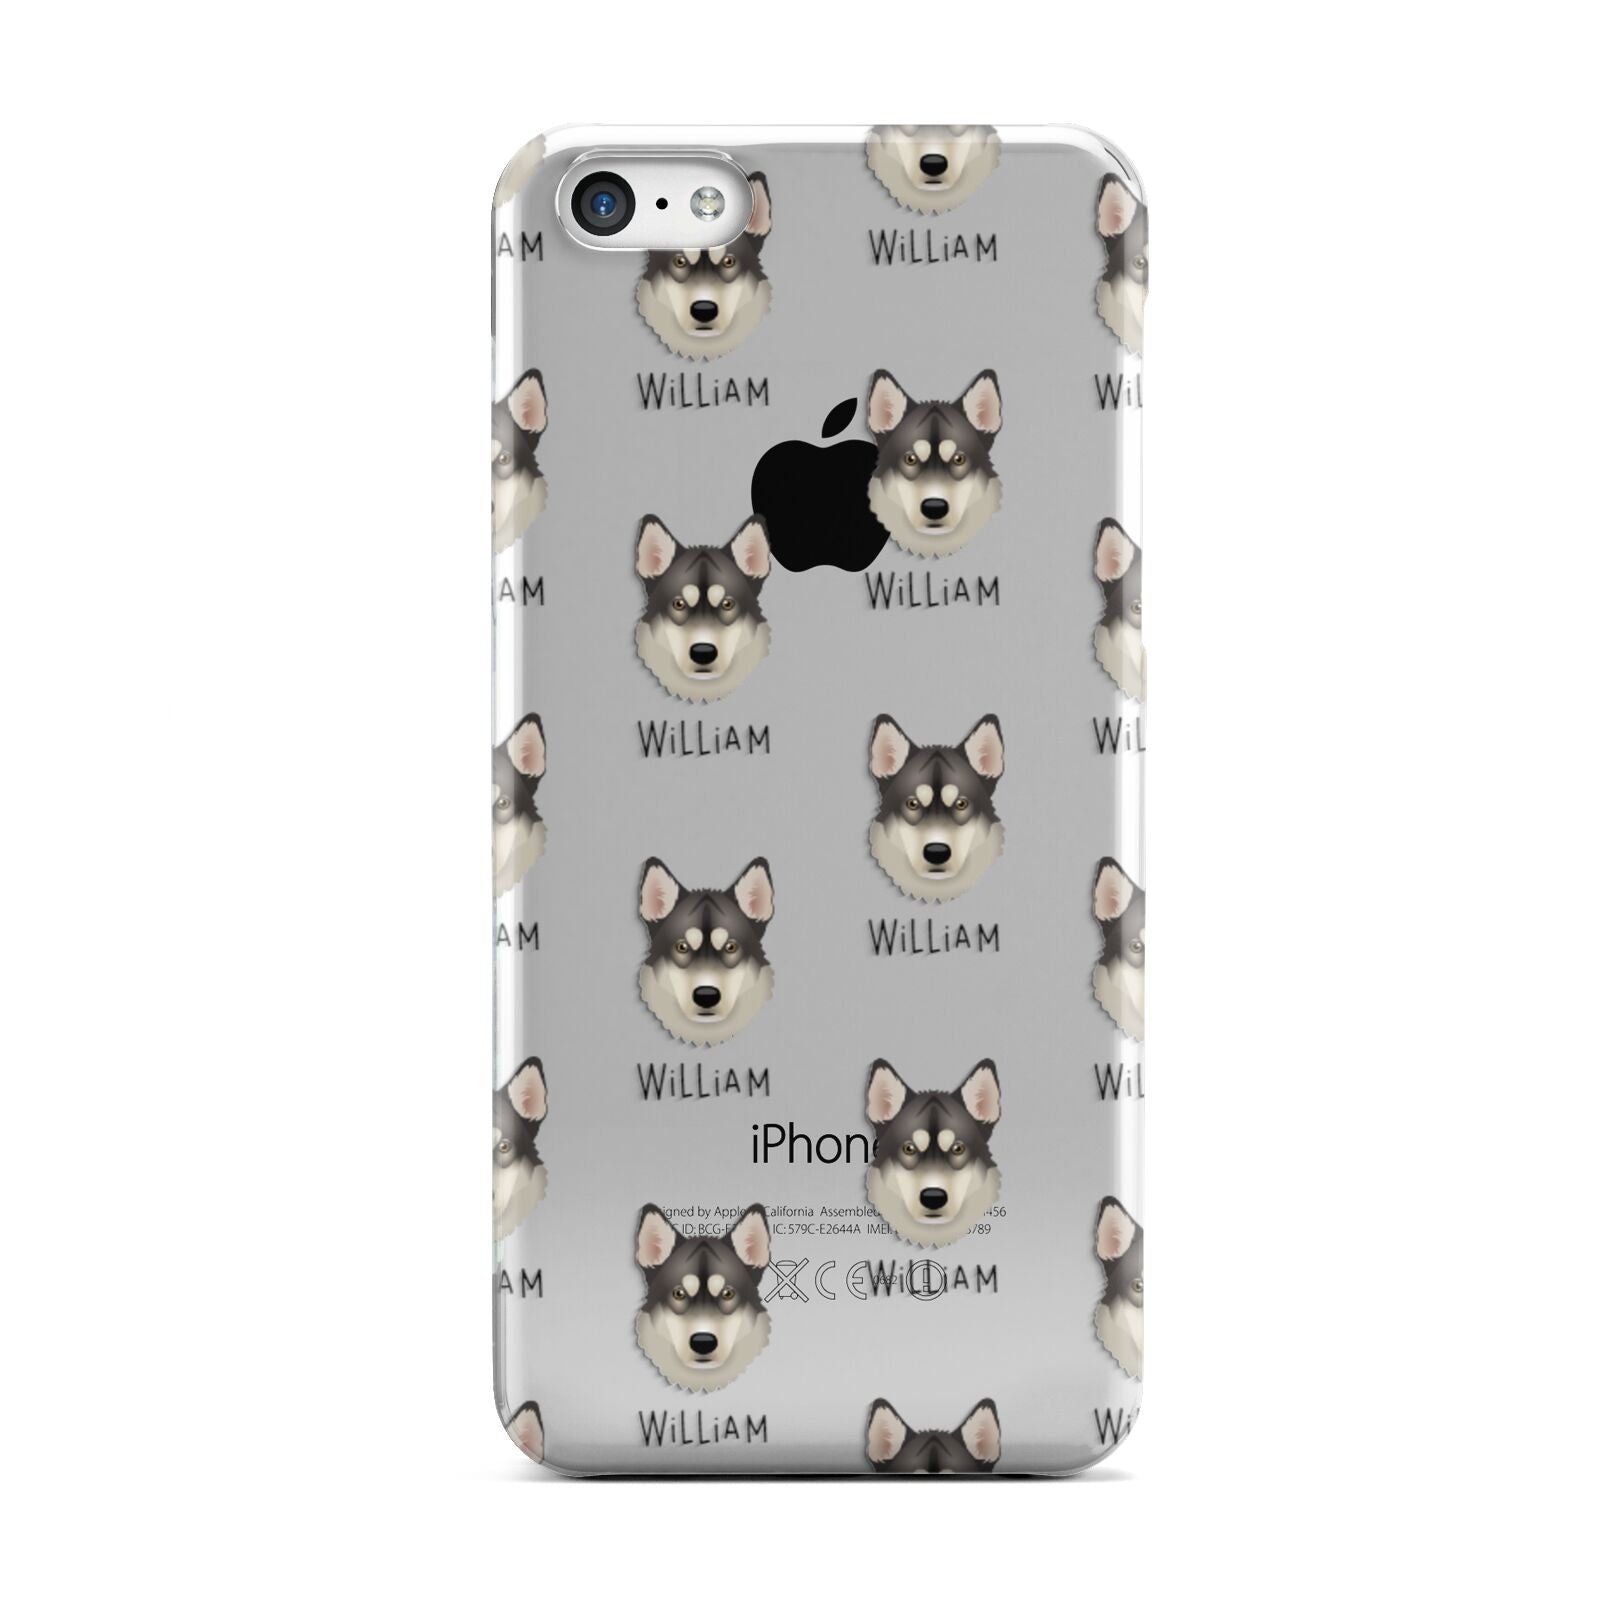 Tamaskan Icon with Name Apple iPhone 5c Case